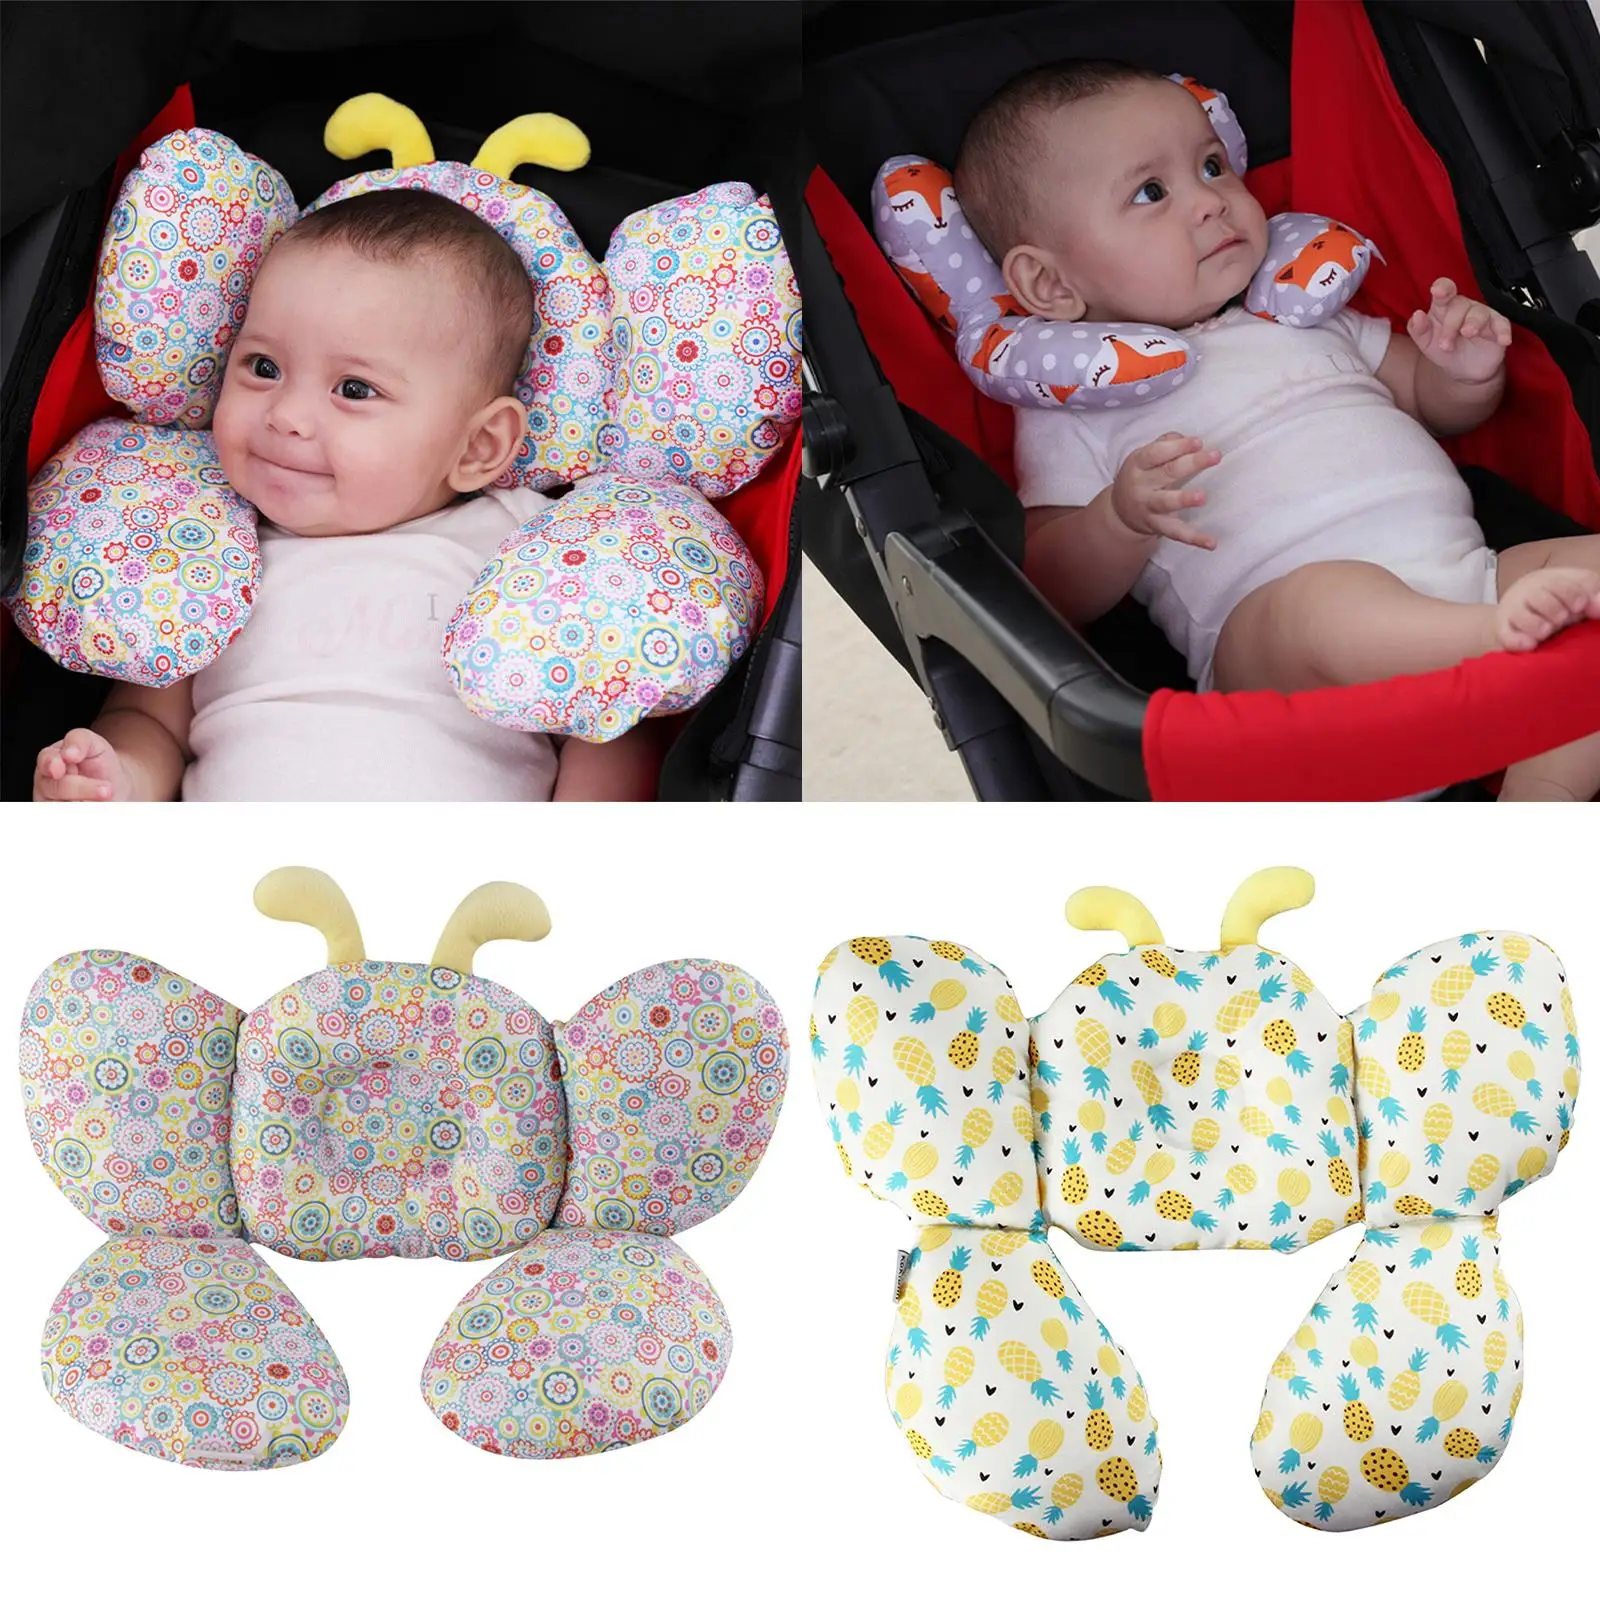 Soft Baby Car Seat  Stroller Comfortable Headrest Cushion Infant Travel for 0-1 Years Old Baby Sleeping Baby Toddlers Boys